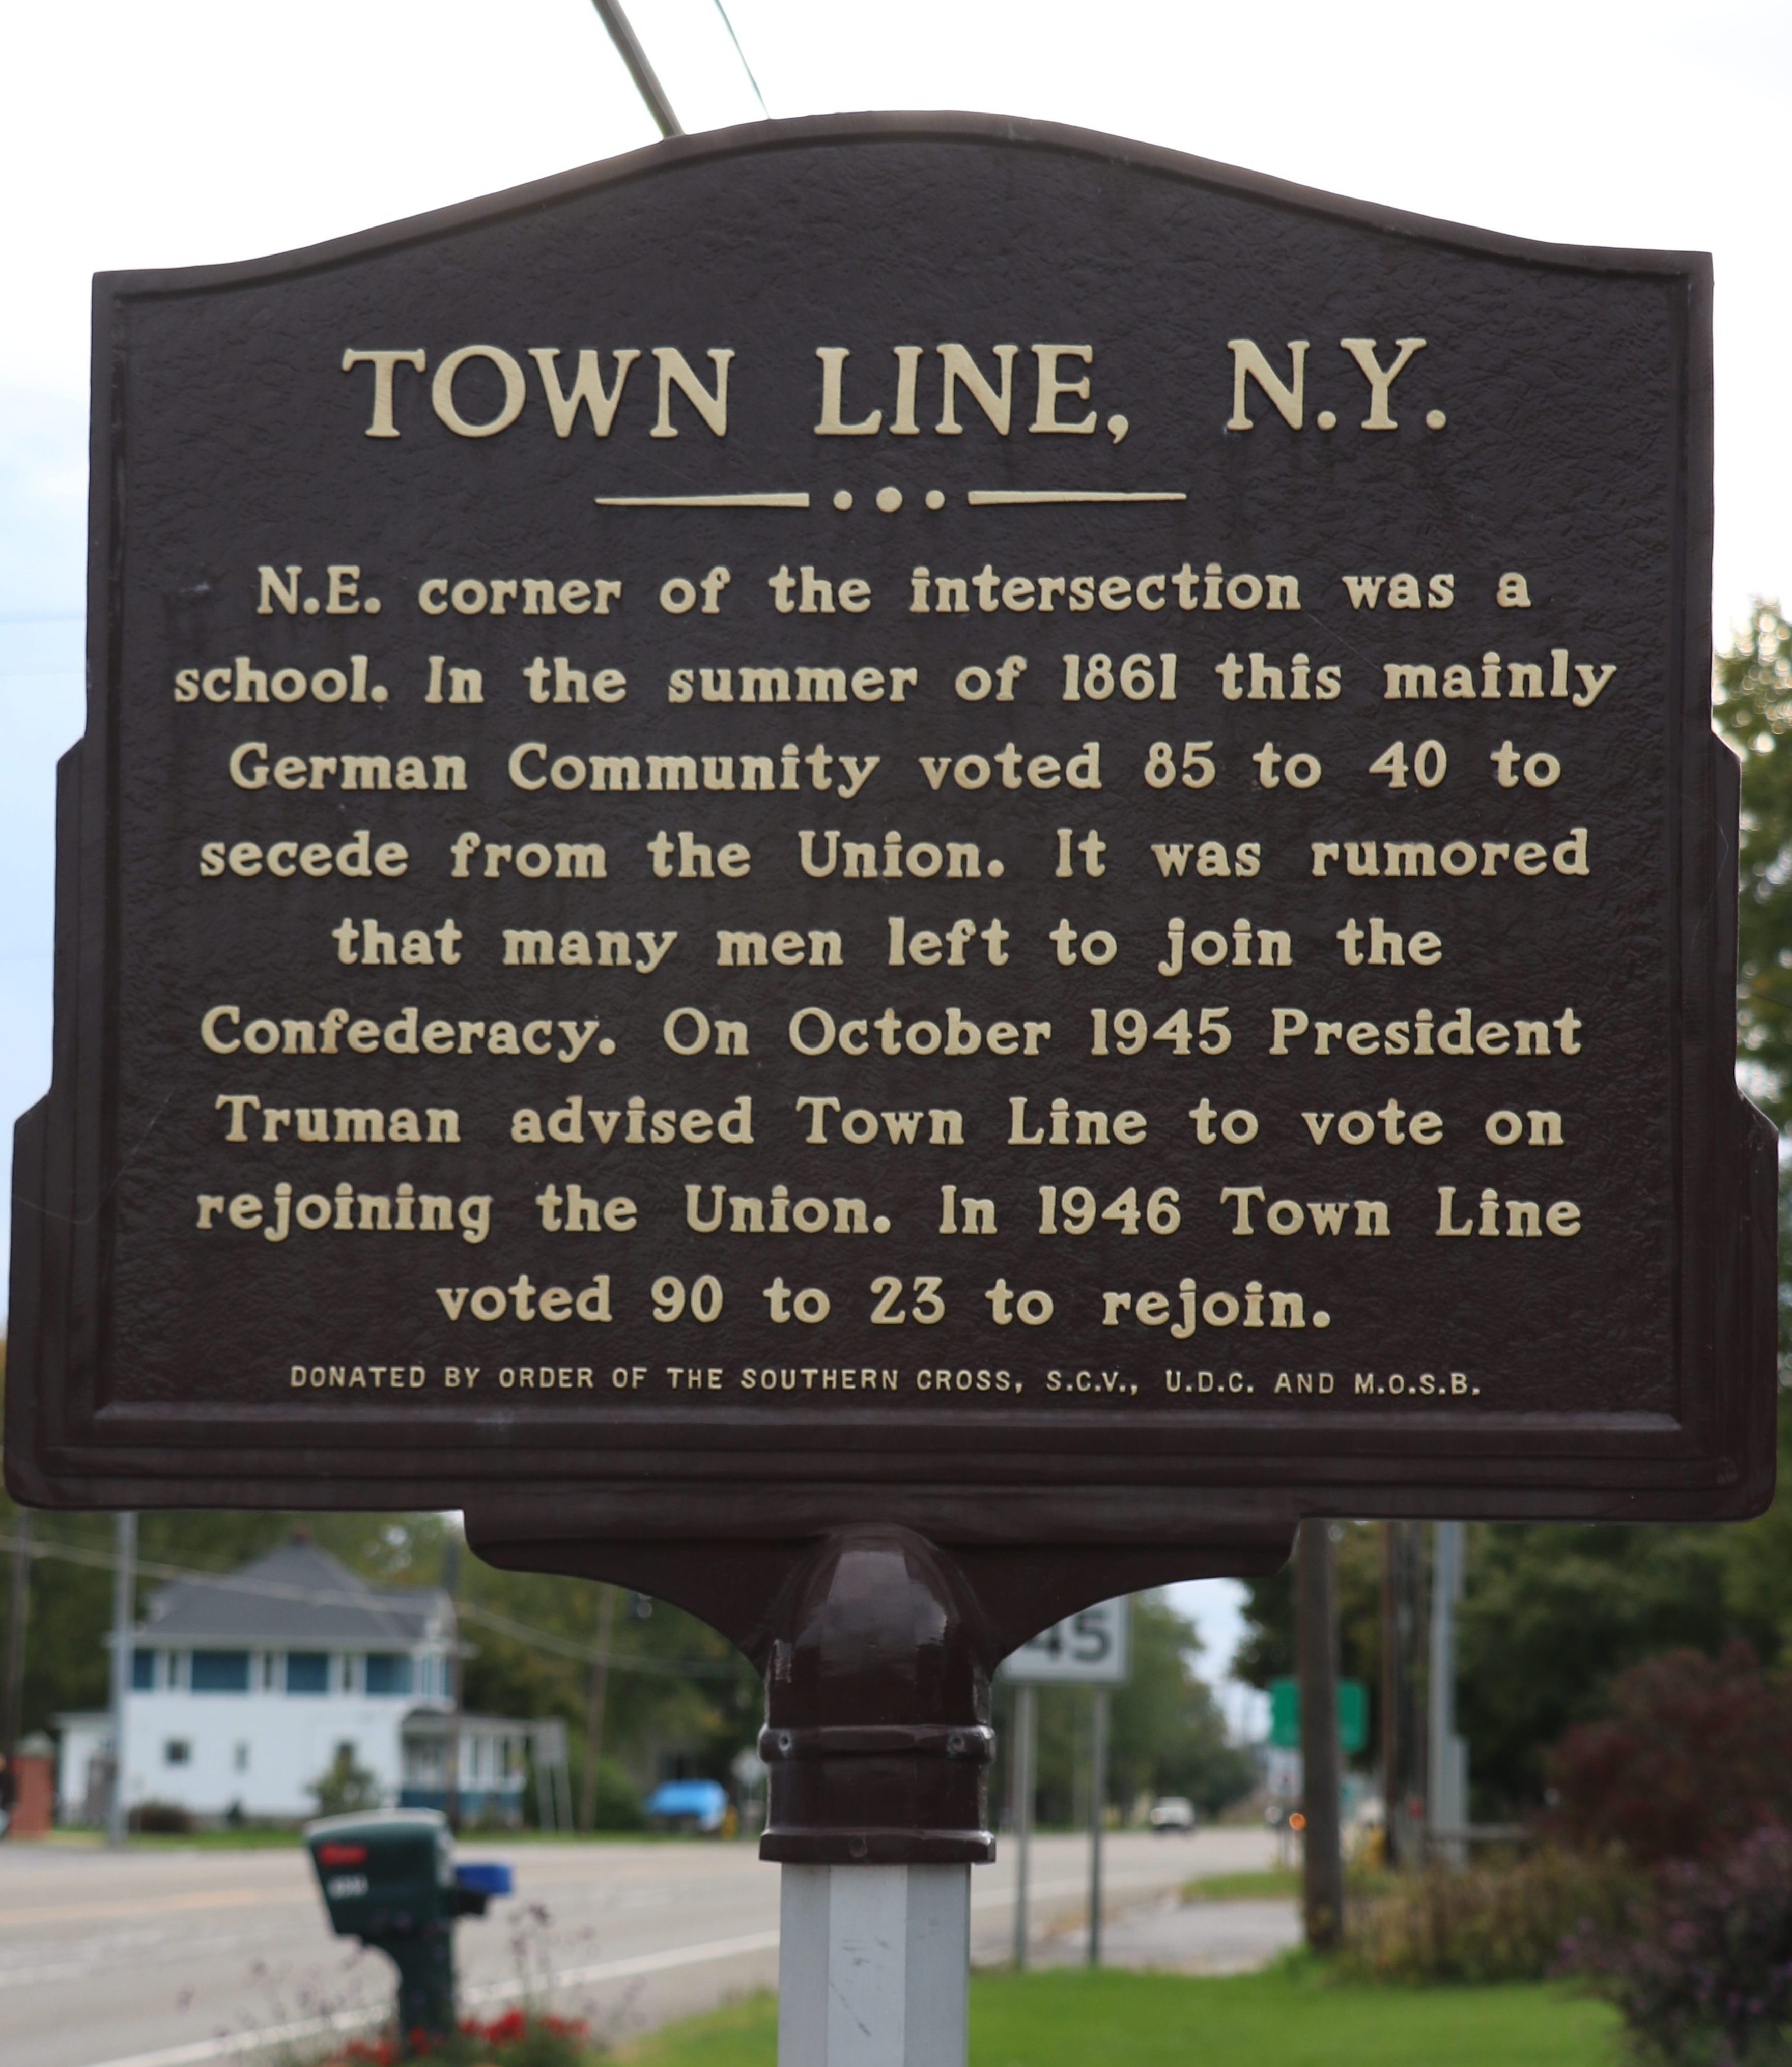 Town Line, N.Y.: N.E. corner of the intersection was a school. In the summer of 1861 this mainly German Community voted 85 to 40 to seceded from the Union. It was rumored that many men left to join the Confederacy. On October 1945 President Truman advised Town Line to vote on rejoining the Union. In 1946 Town Line voted 90 to 23 to rejoin.